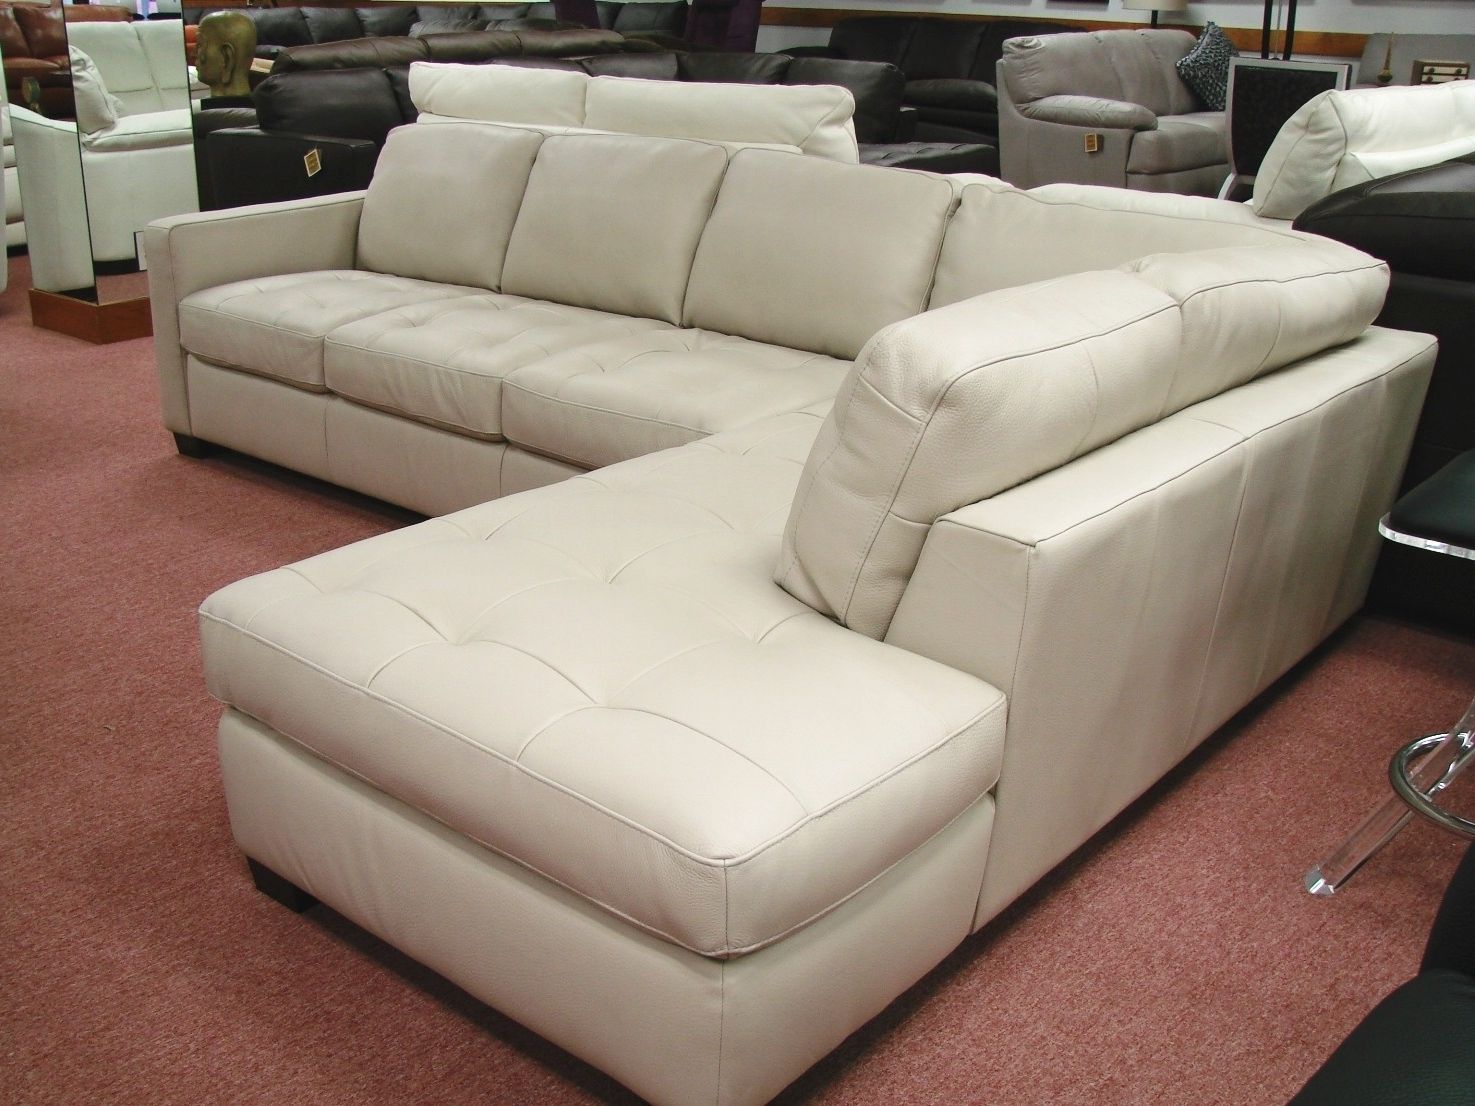 Popular Fresh Contemporary Sectional Sofa Seattle Wa – Mediasupload For Seattle Sectional Sofas (View 8 of 15)